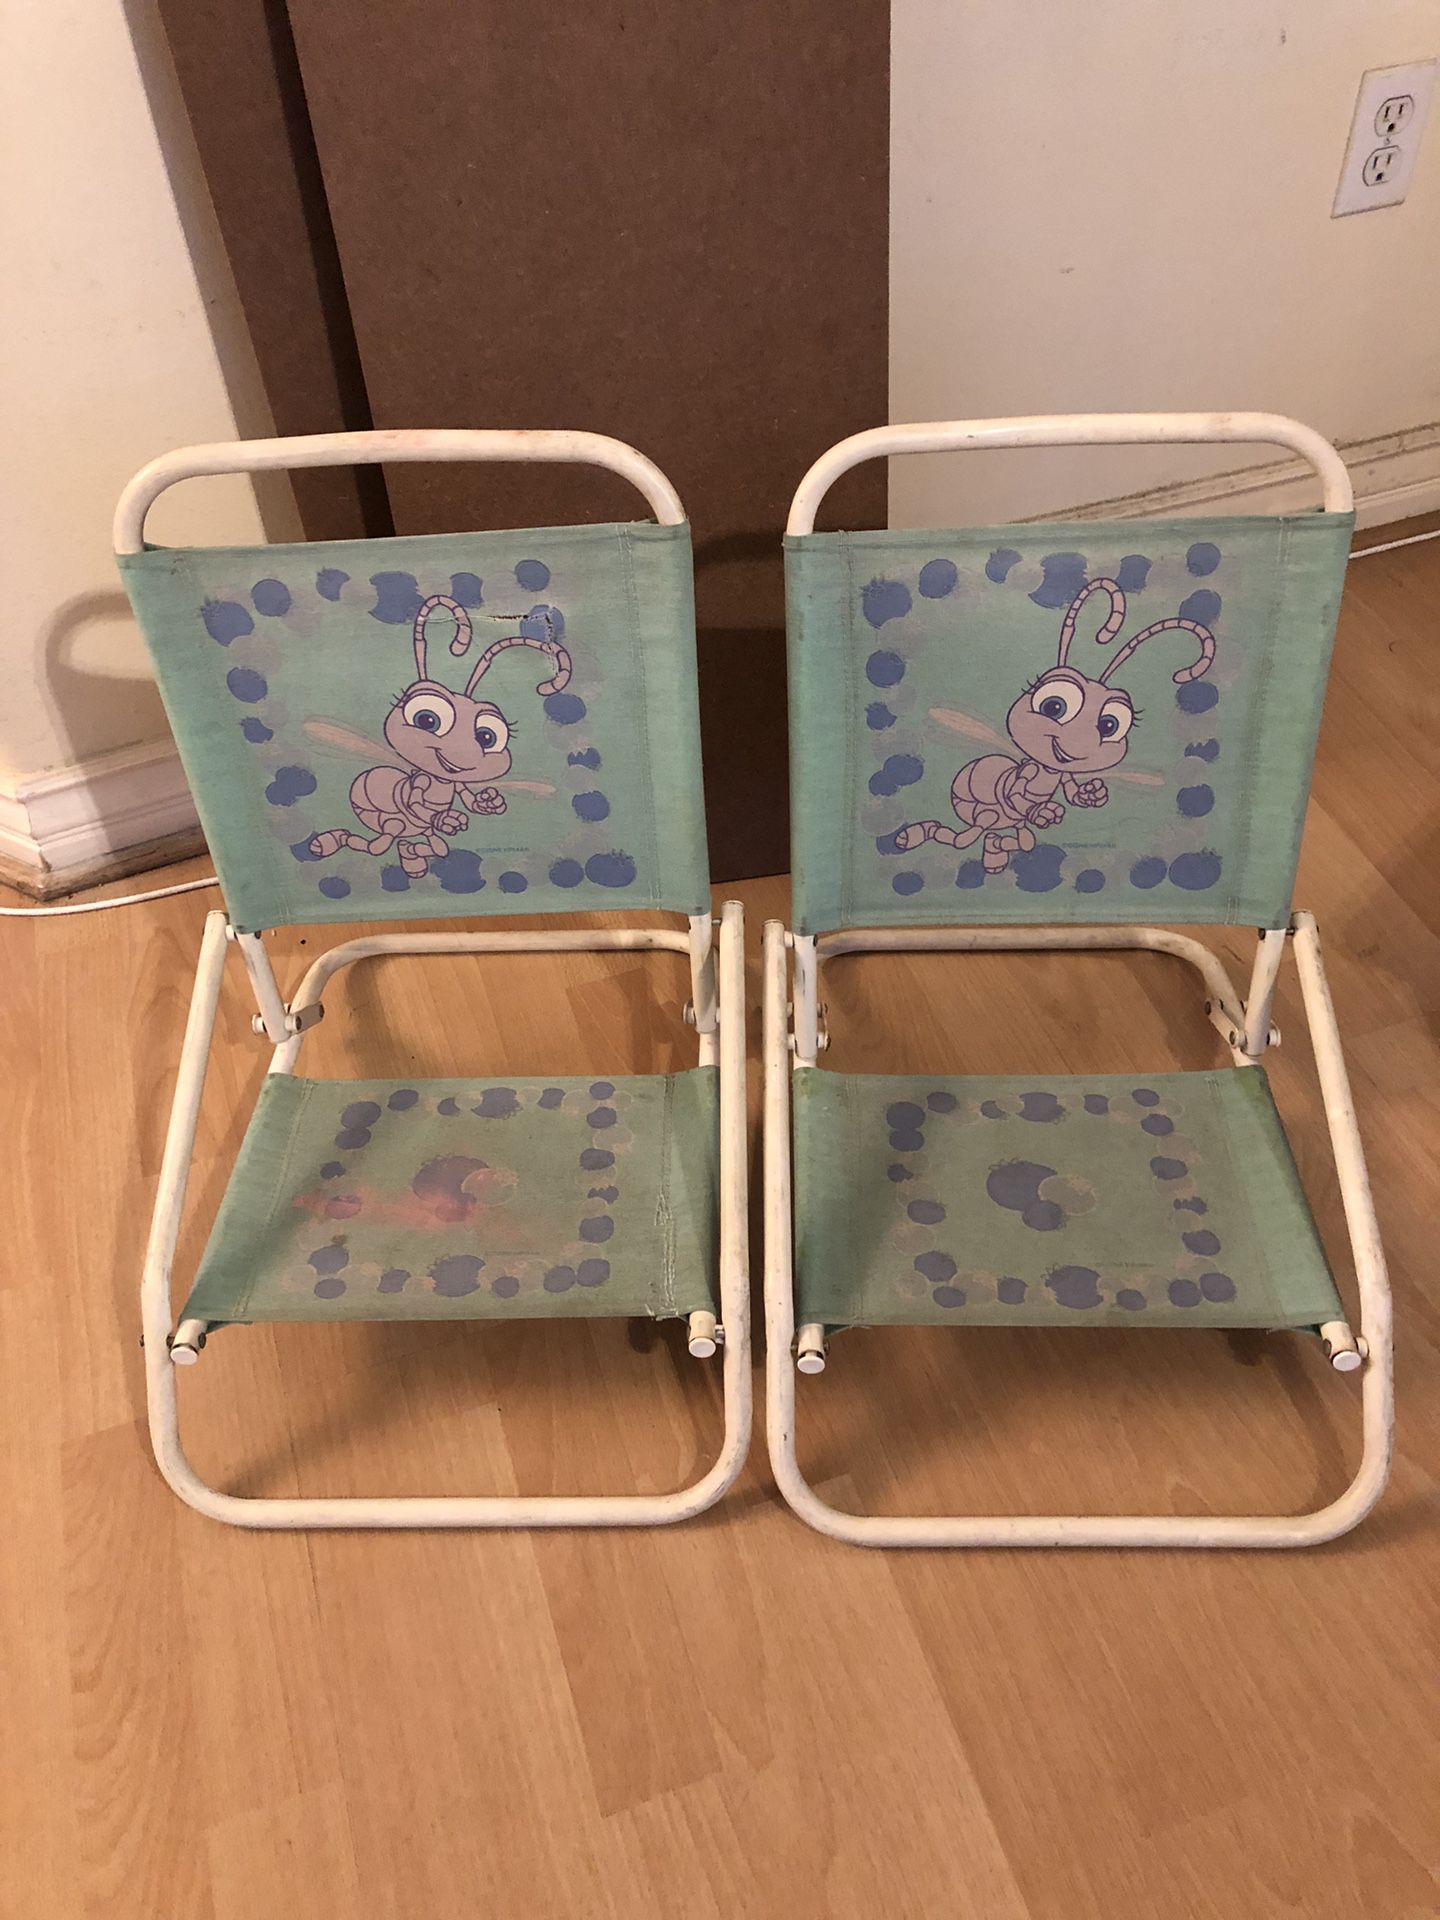 Kids Small Beach Chairs, $5 For 2